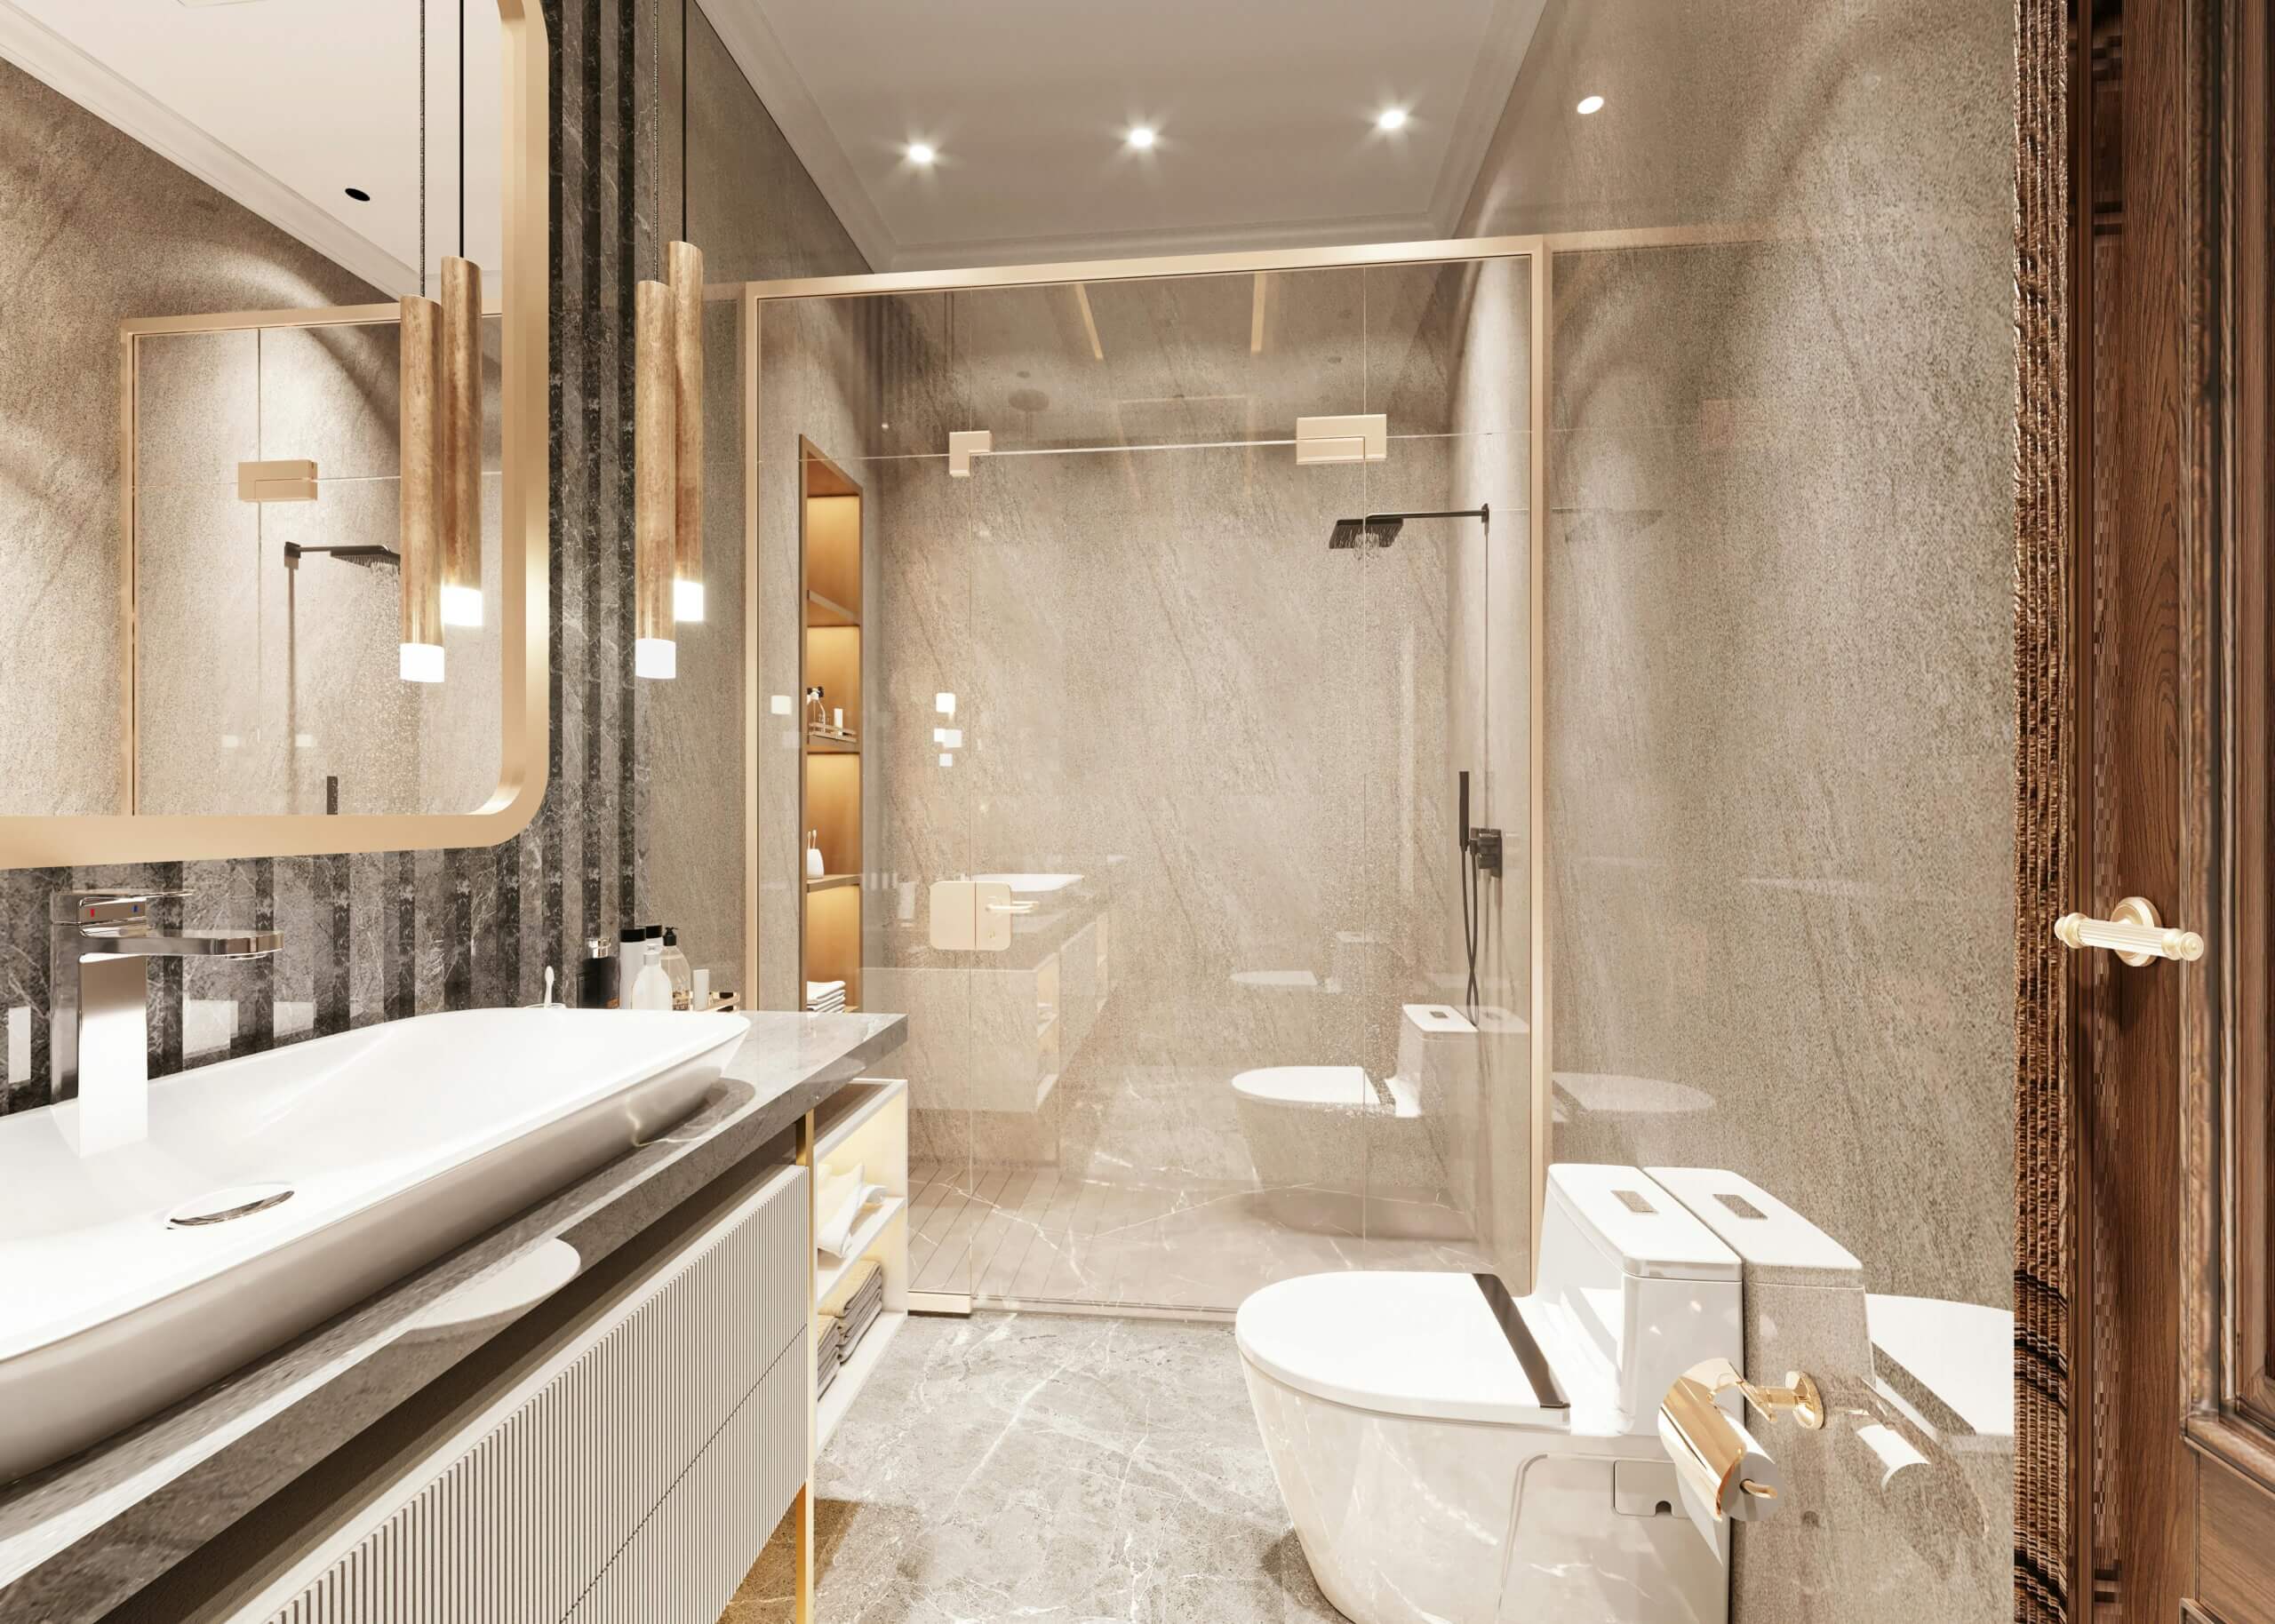 Materials and Finishes For Luxury Bathroom Remodeling